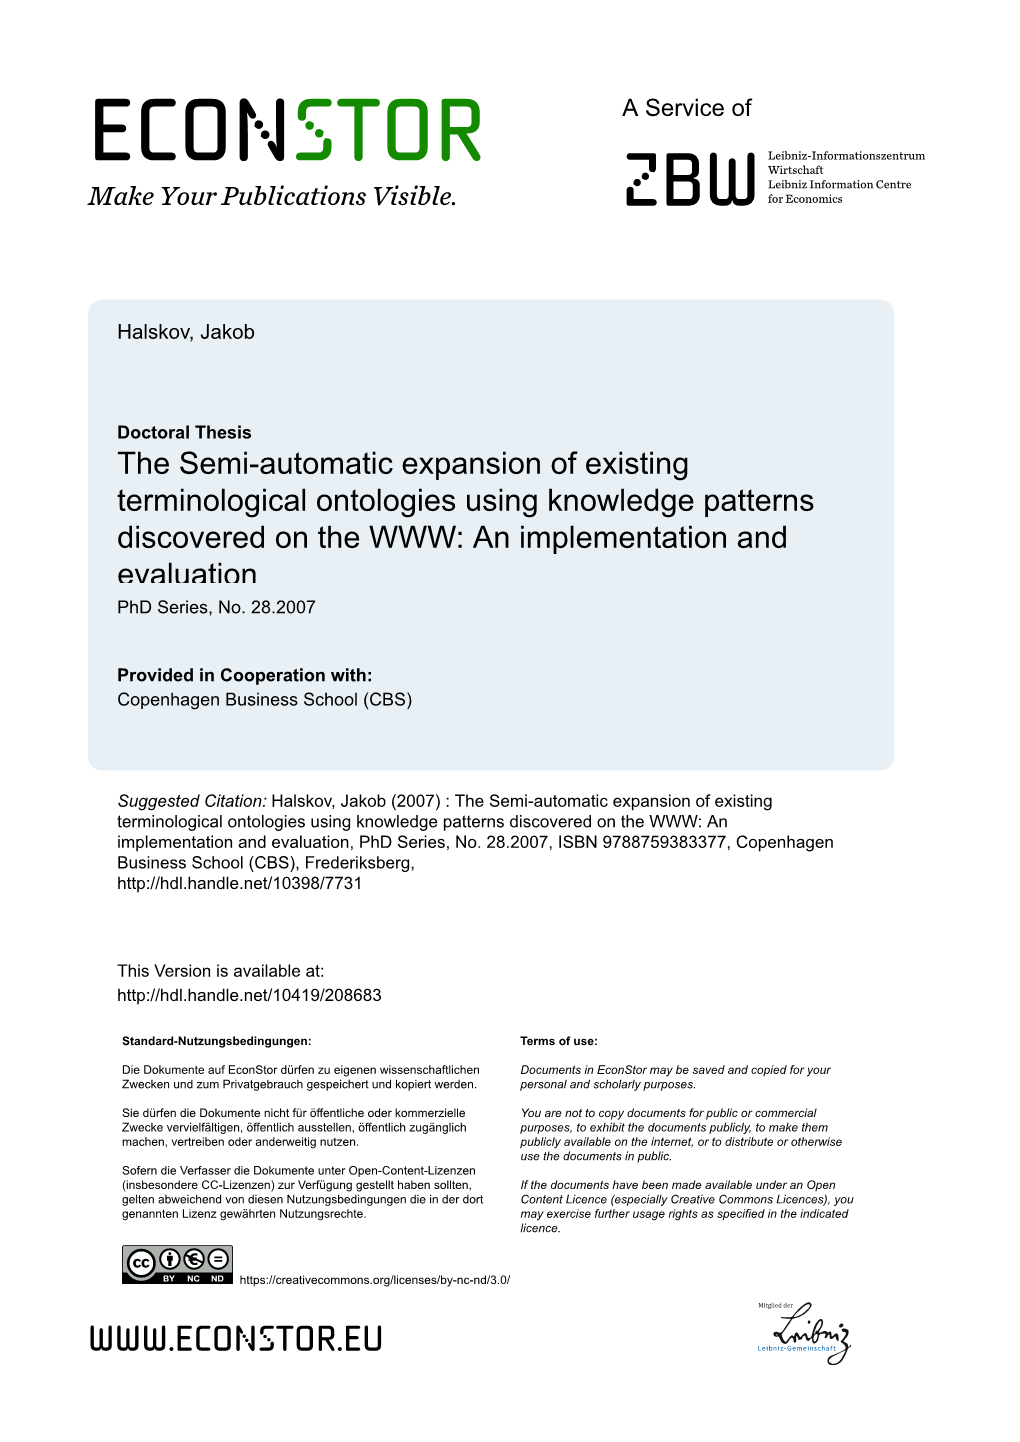 The Semi-Automatic Expansion of Existing Terminological Ontologies Using Knowledge Patterns Discovered on the WWW: an Implementation and Evaluation Phd Series, No